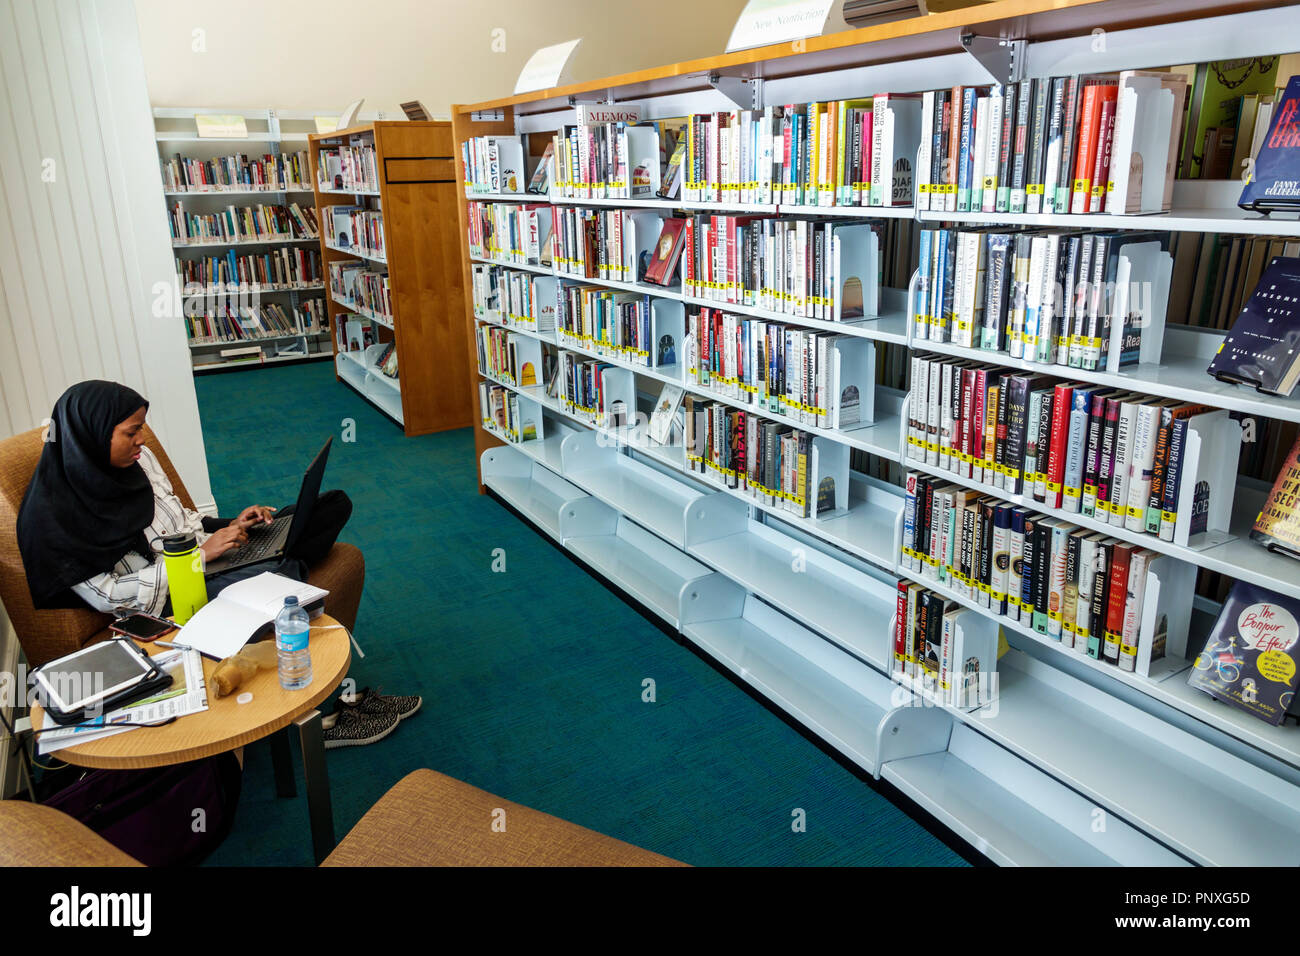 West Palm Beach Florida,Mandel Public Library,interior inside,books bookshelves,Muslim,Asian Asians ethnic immigrant immigrants minority,adult adults Stock Photo